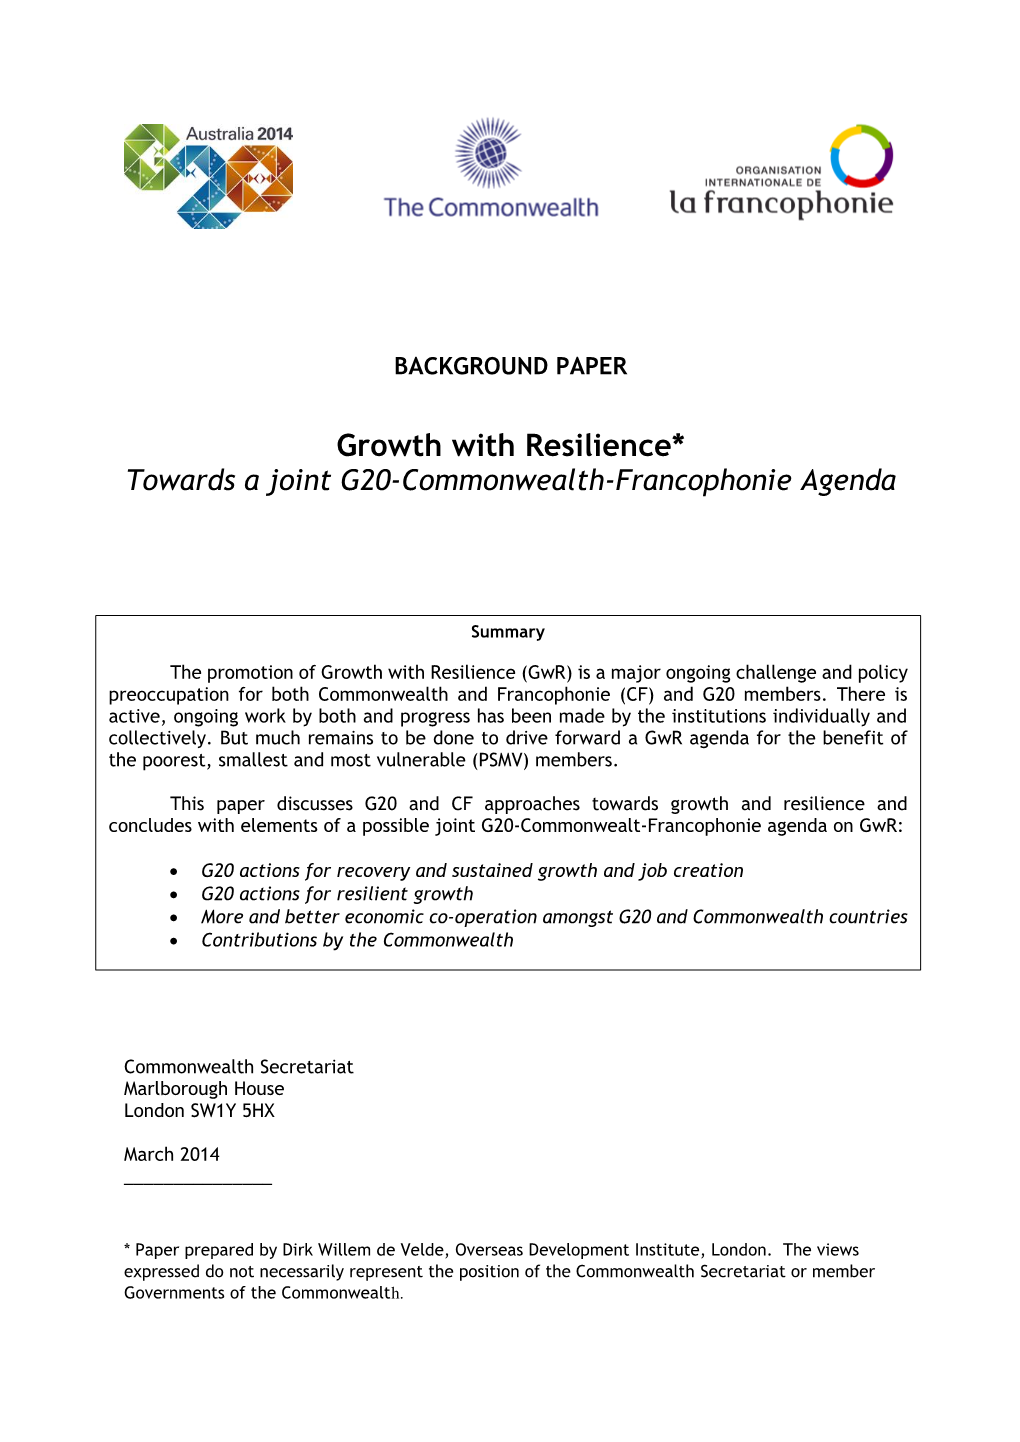 Growth with Resilience* Towards a Joint G20-Commonwealth-Francophonie Agenda